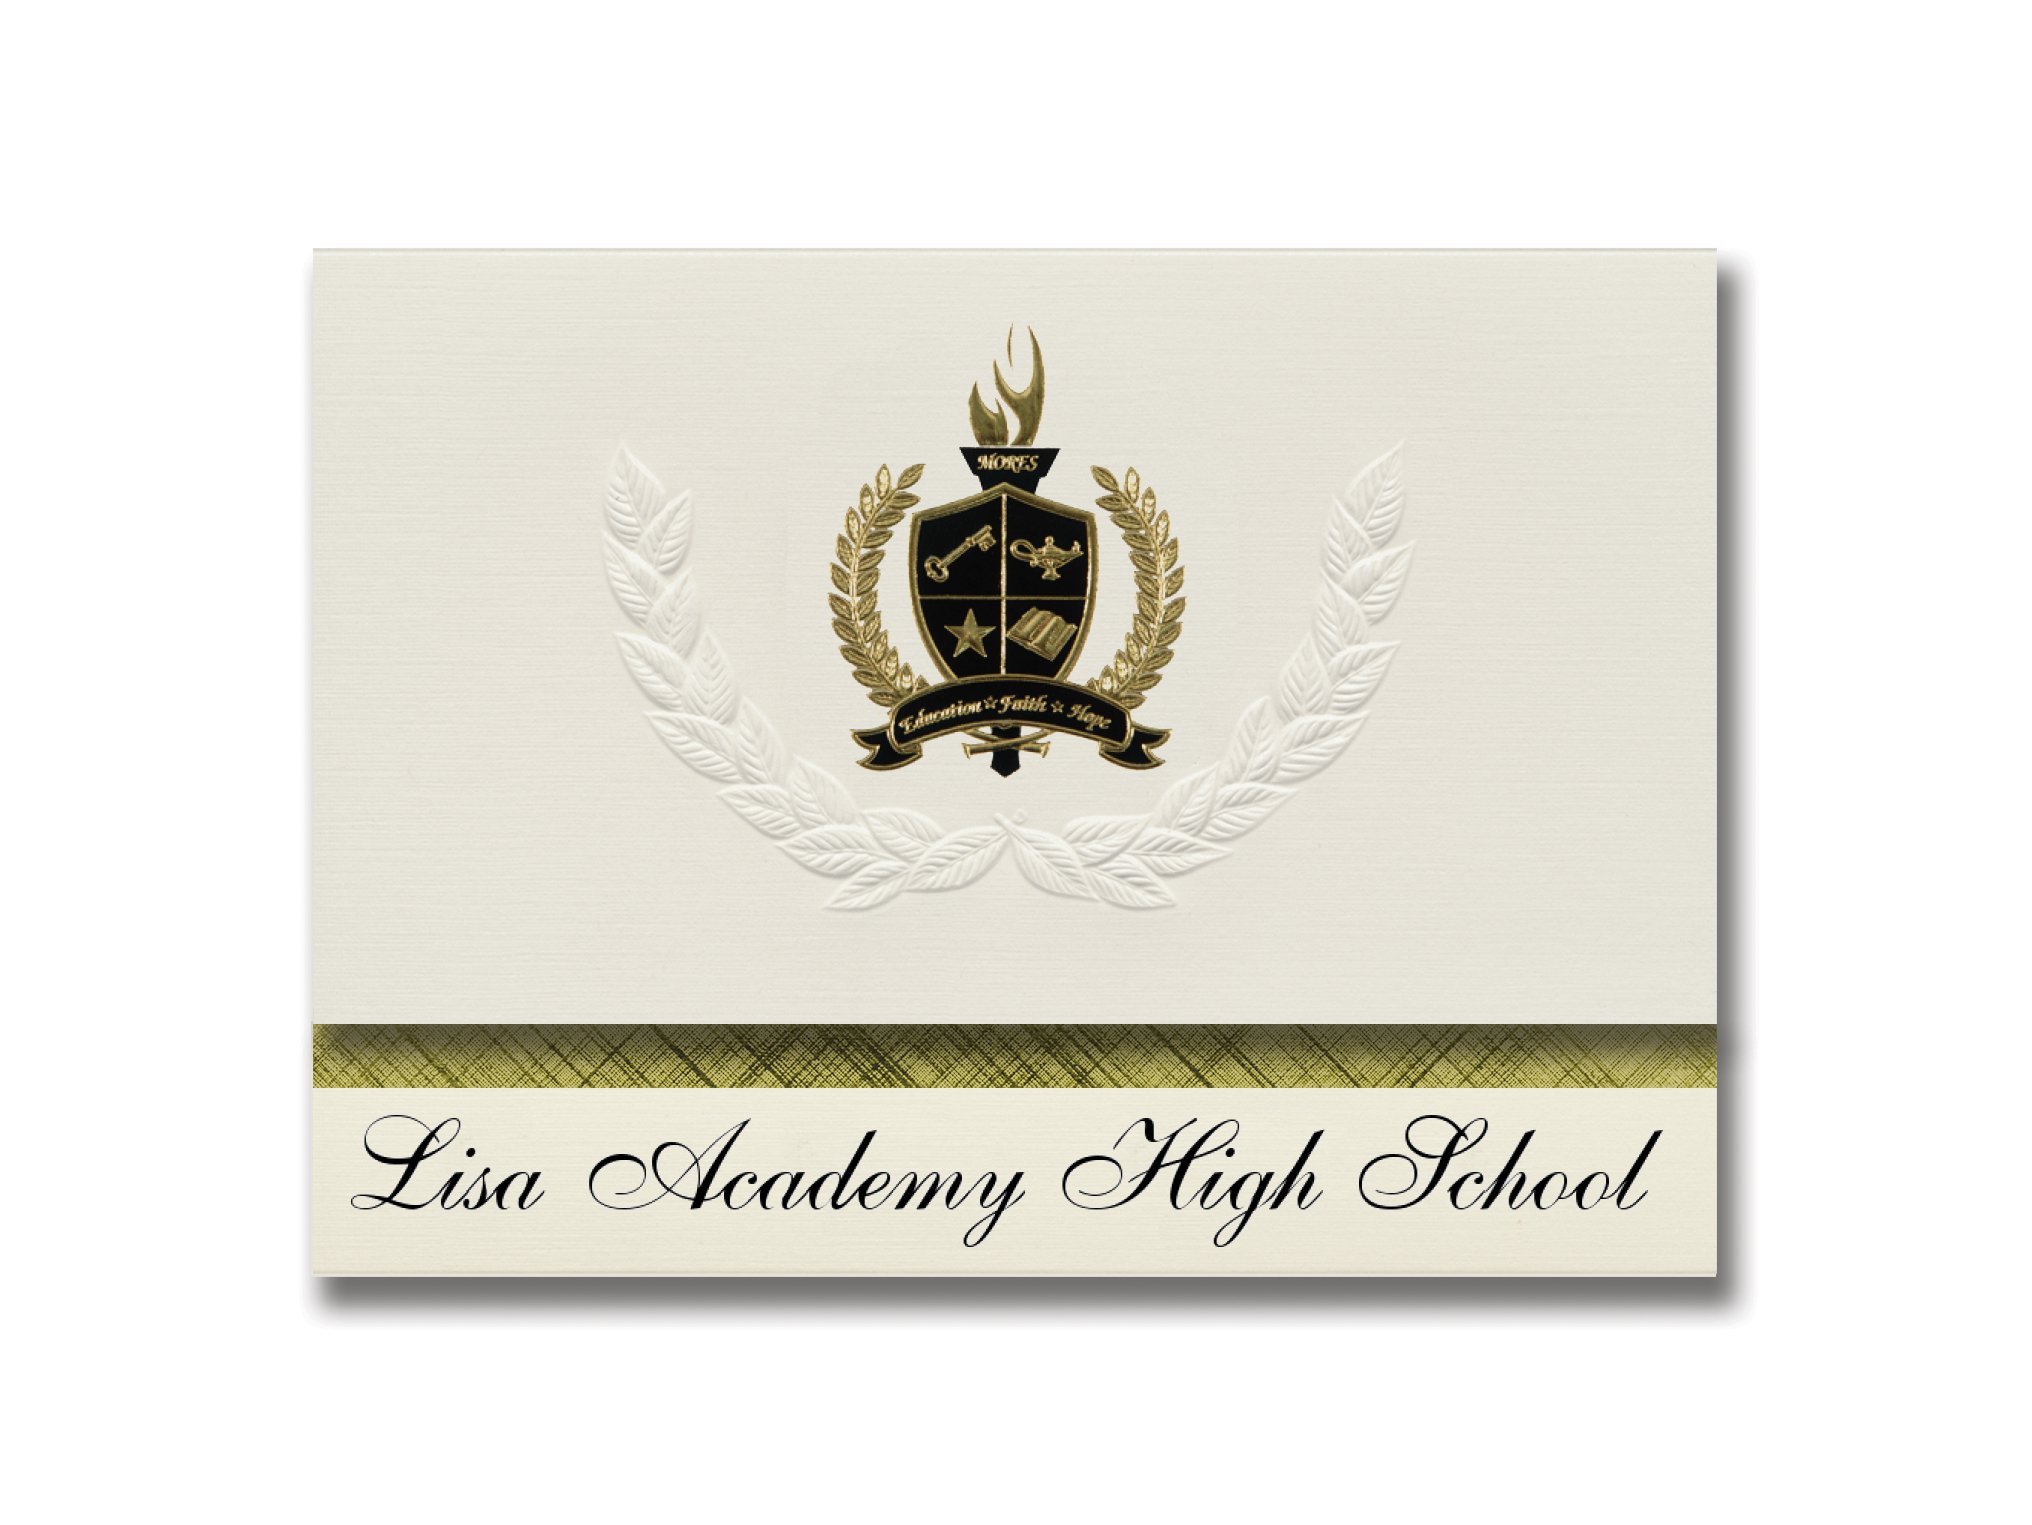 Signature Announcements Lisa Academy High School (Little Rock, AR) Graduation Announcements, Presidential style, Basic package of 25 with Gold & Bl...